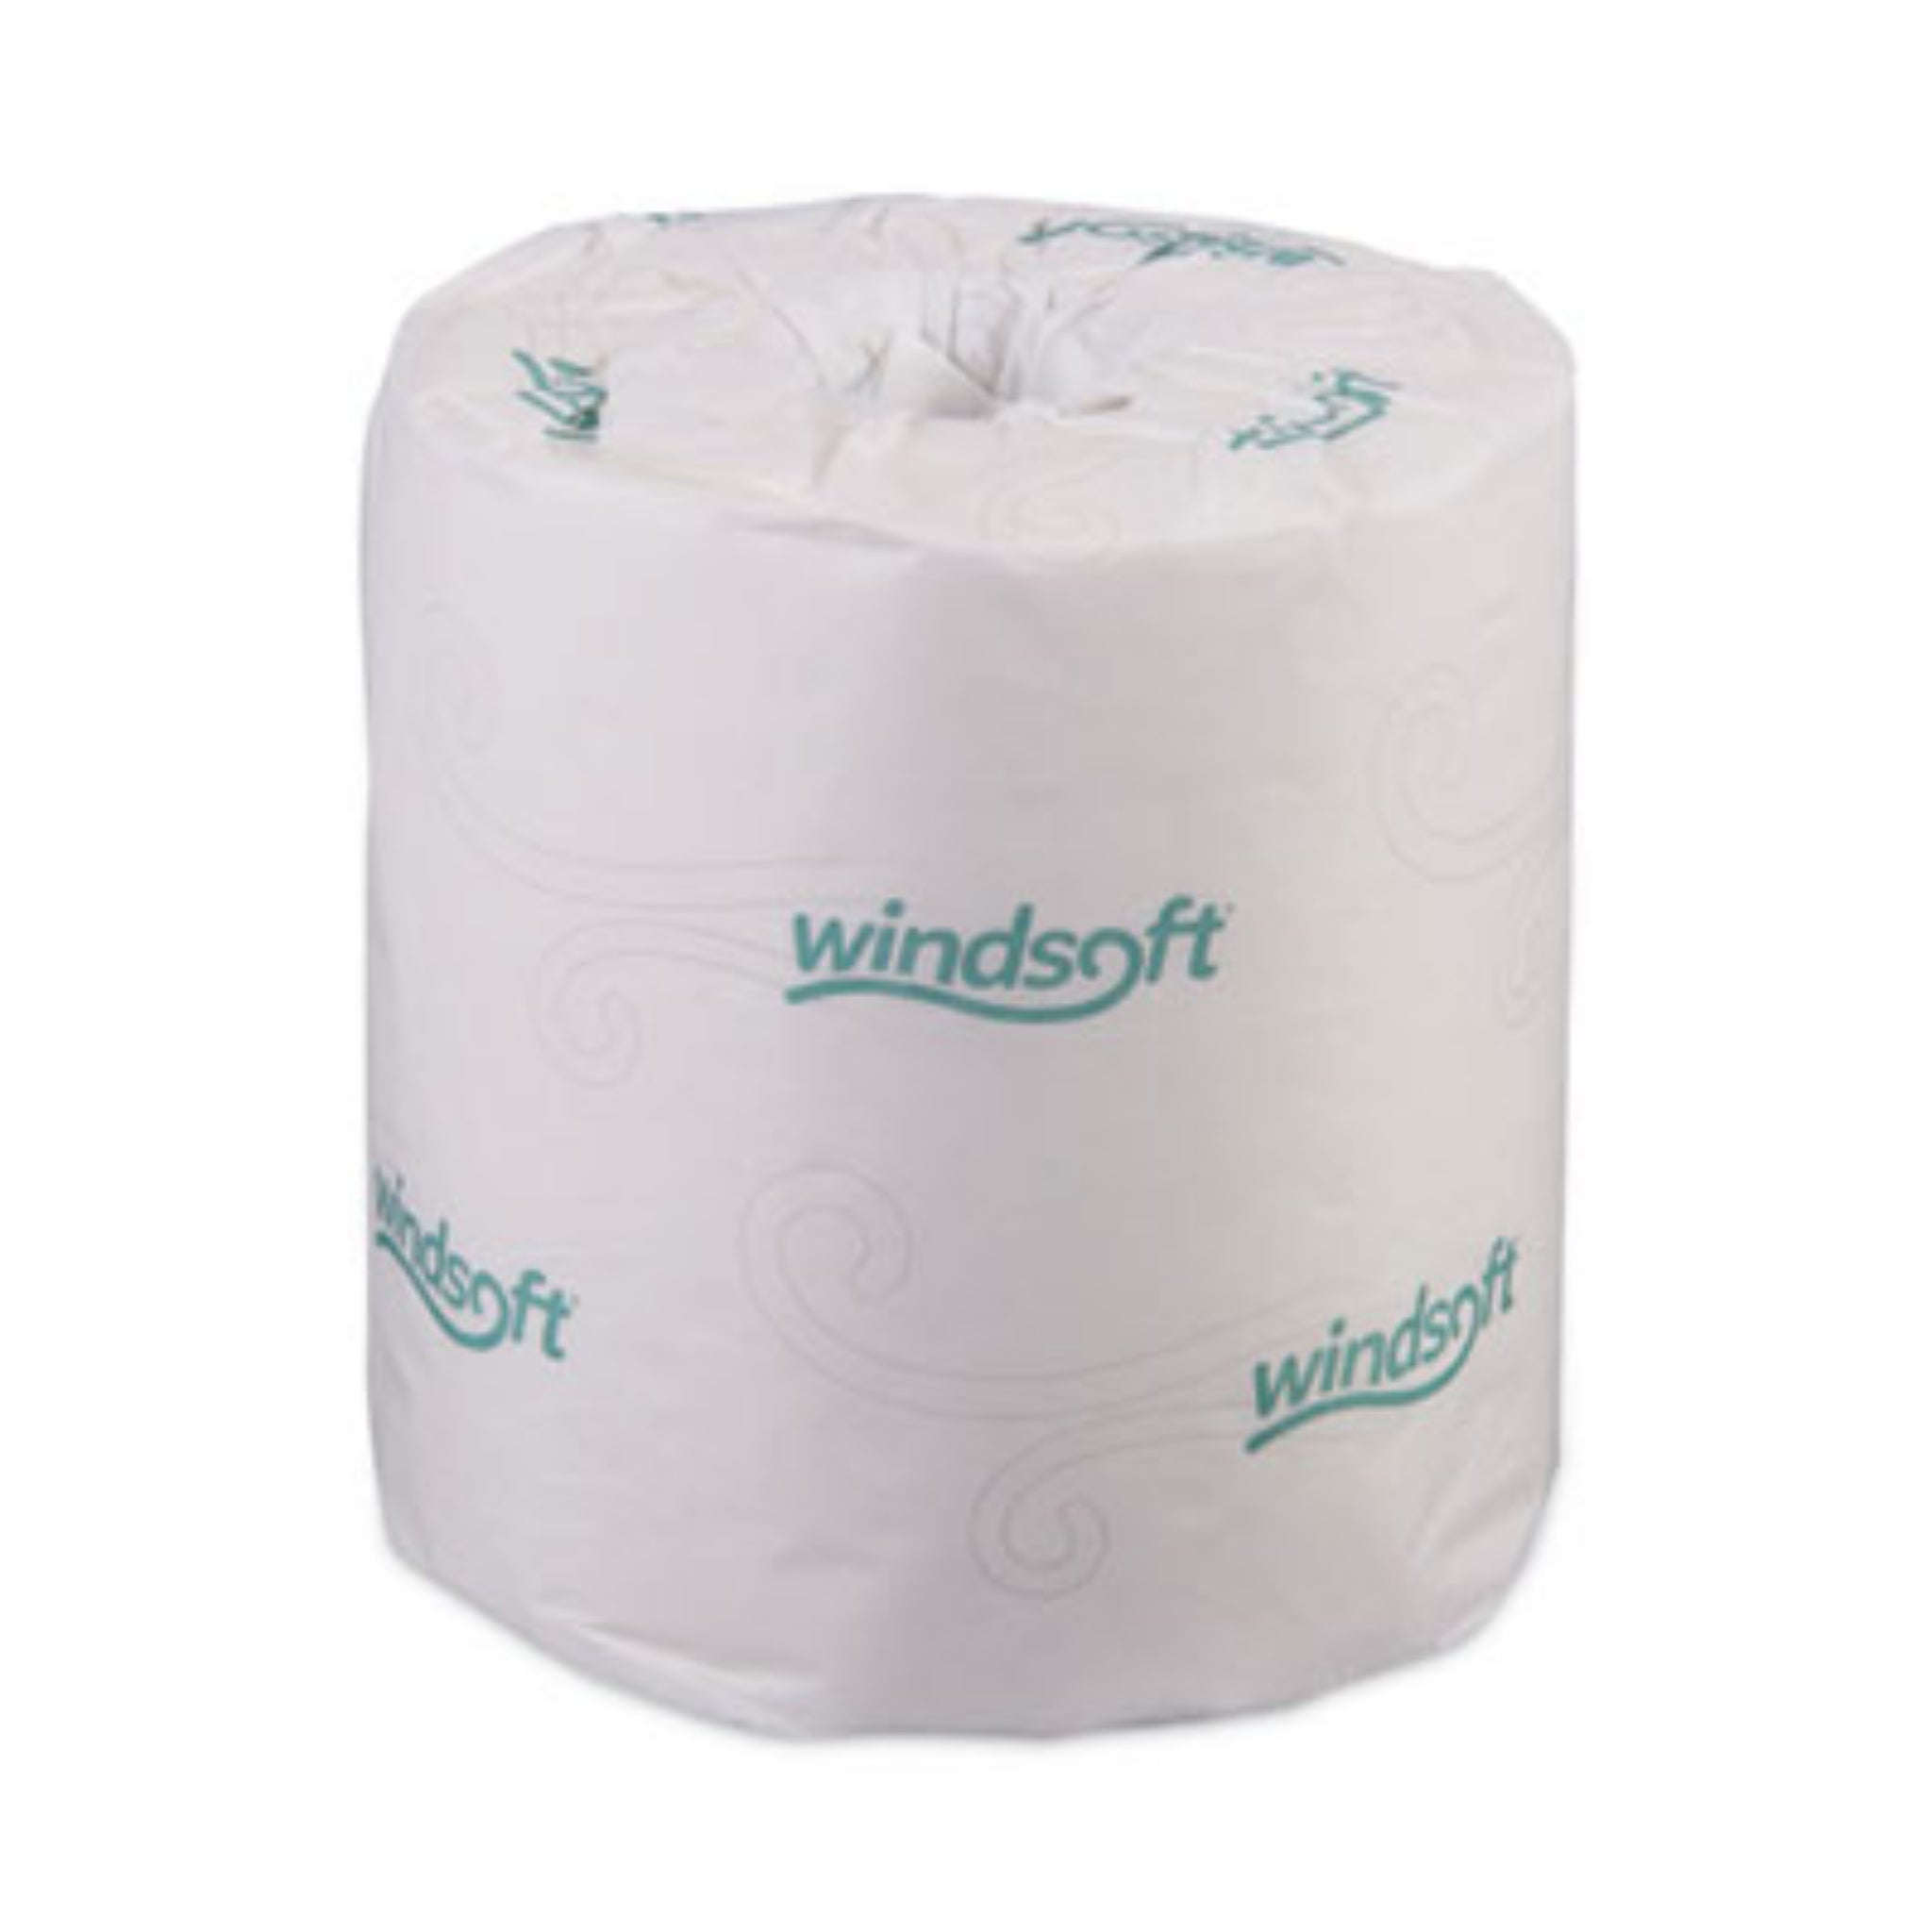 WINDSOFT WIN2240B Bath Tissue, Wrapped Individually